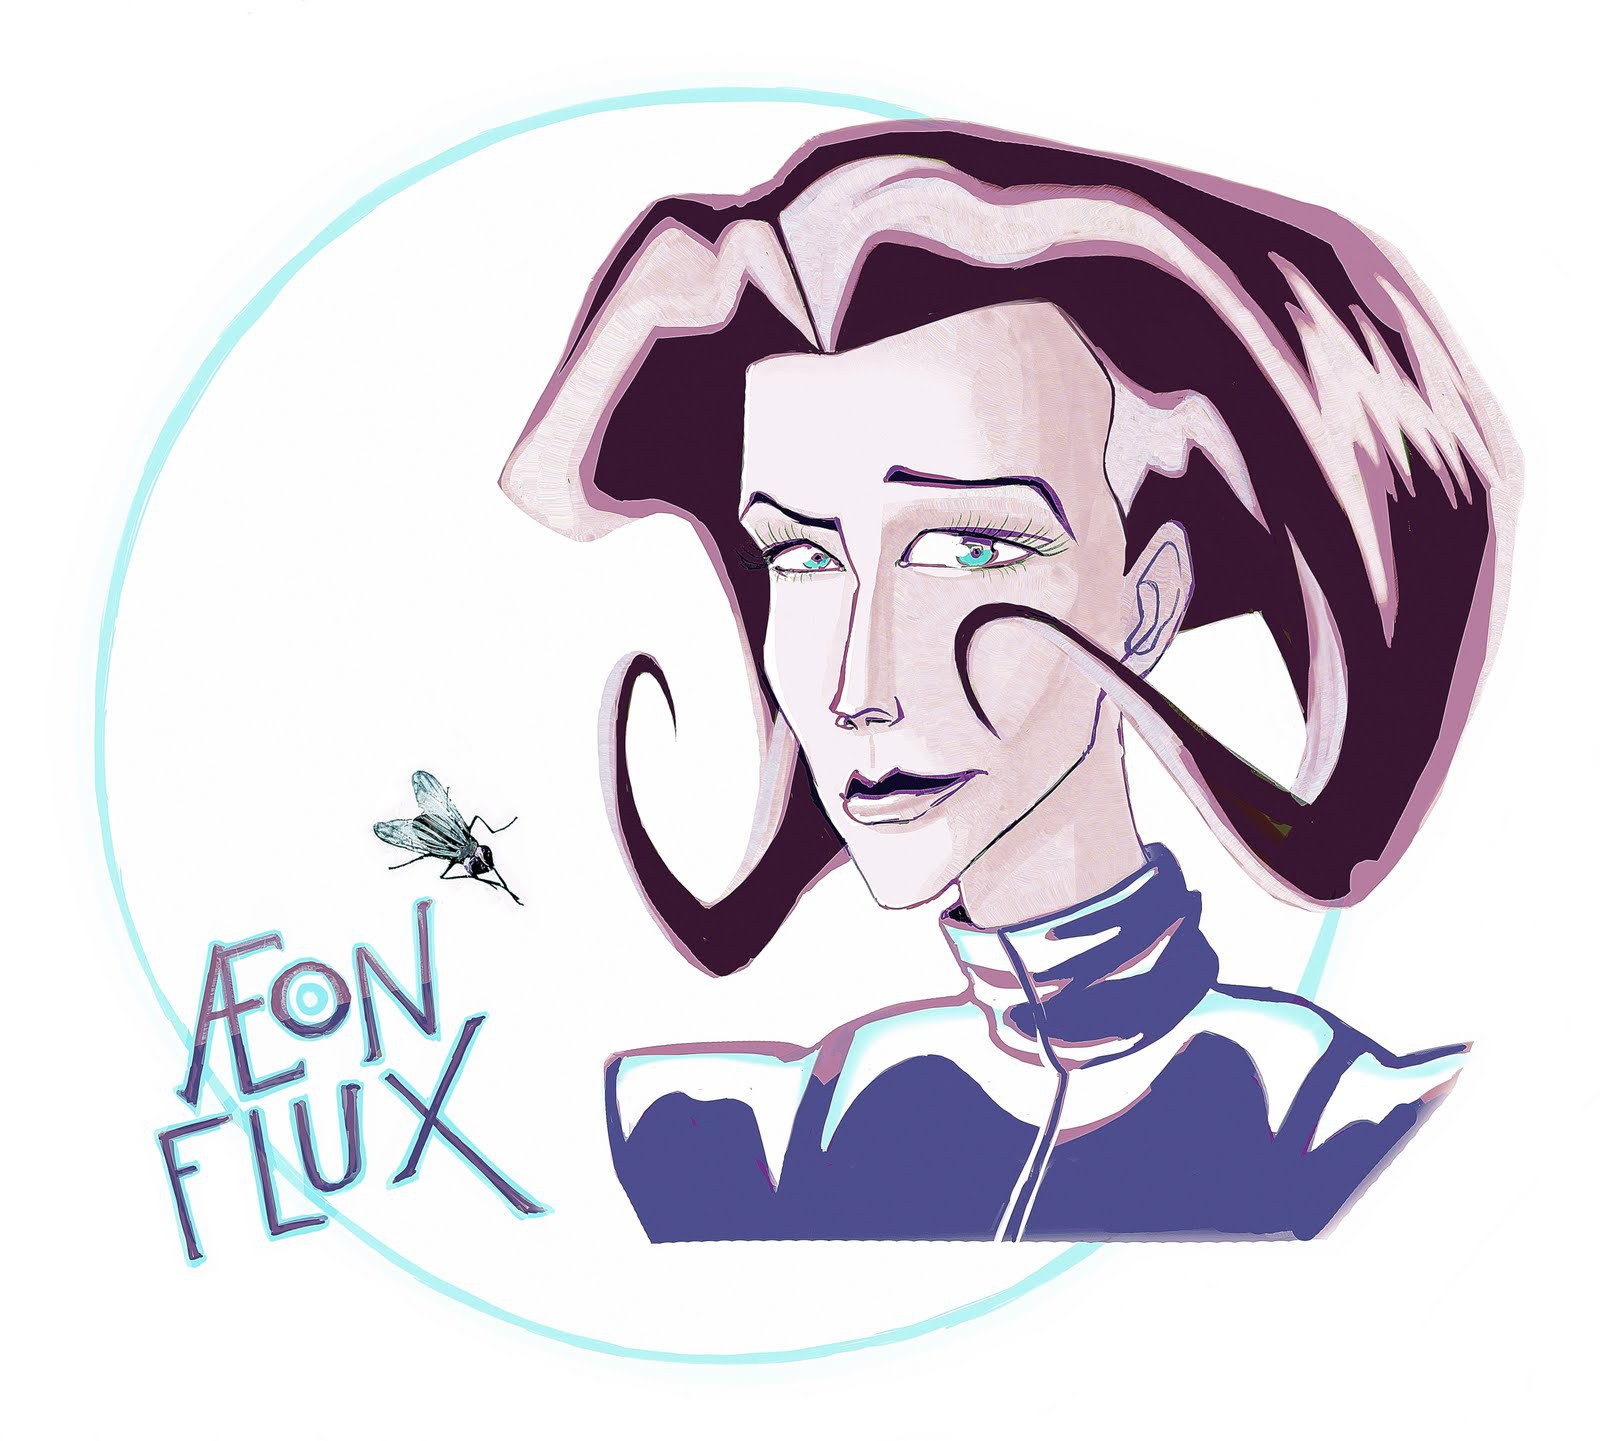 The Aeon Flux Wallpaper And Image Pictures Photos